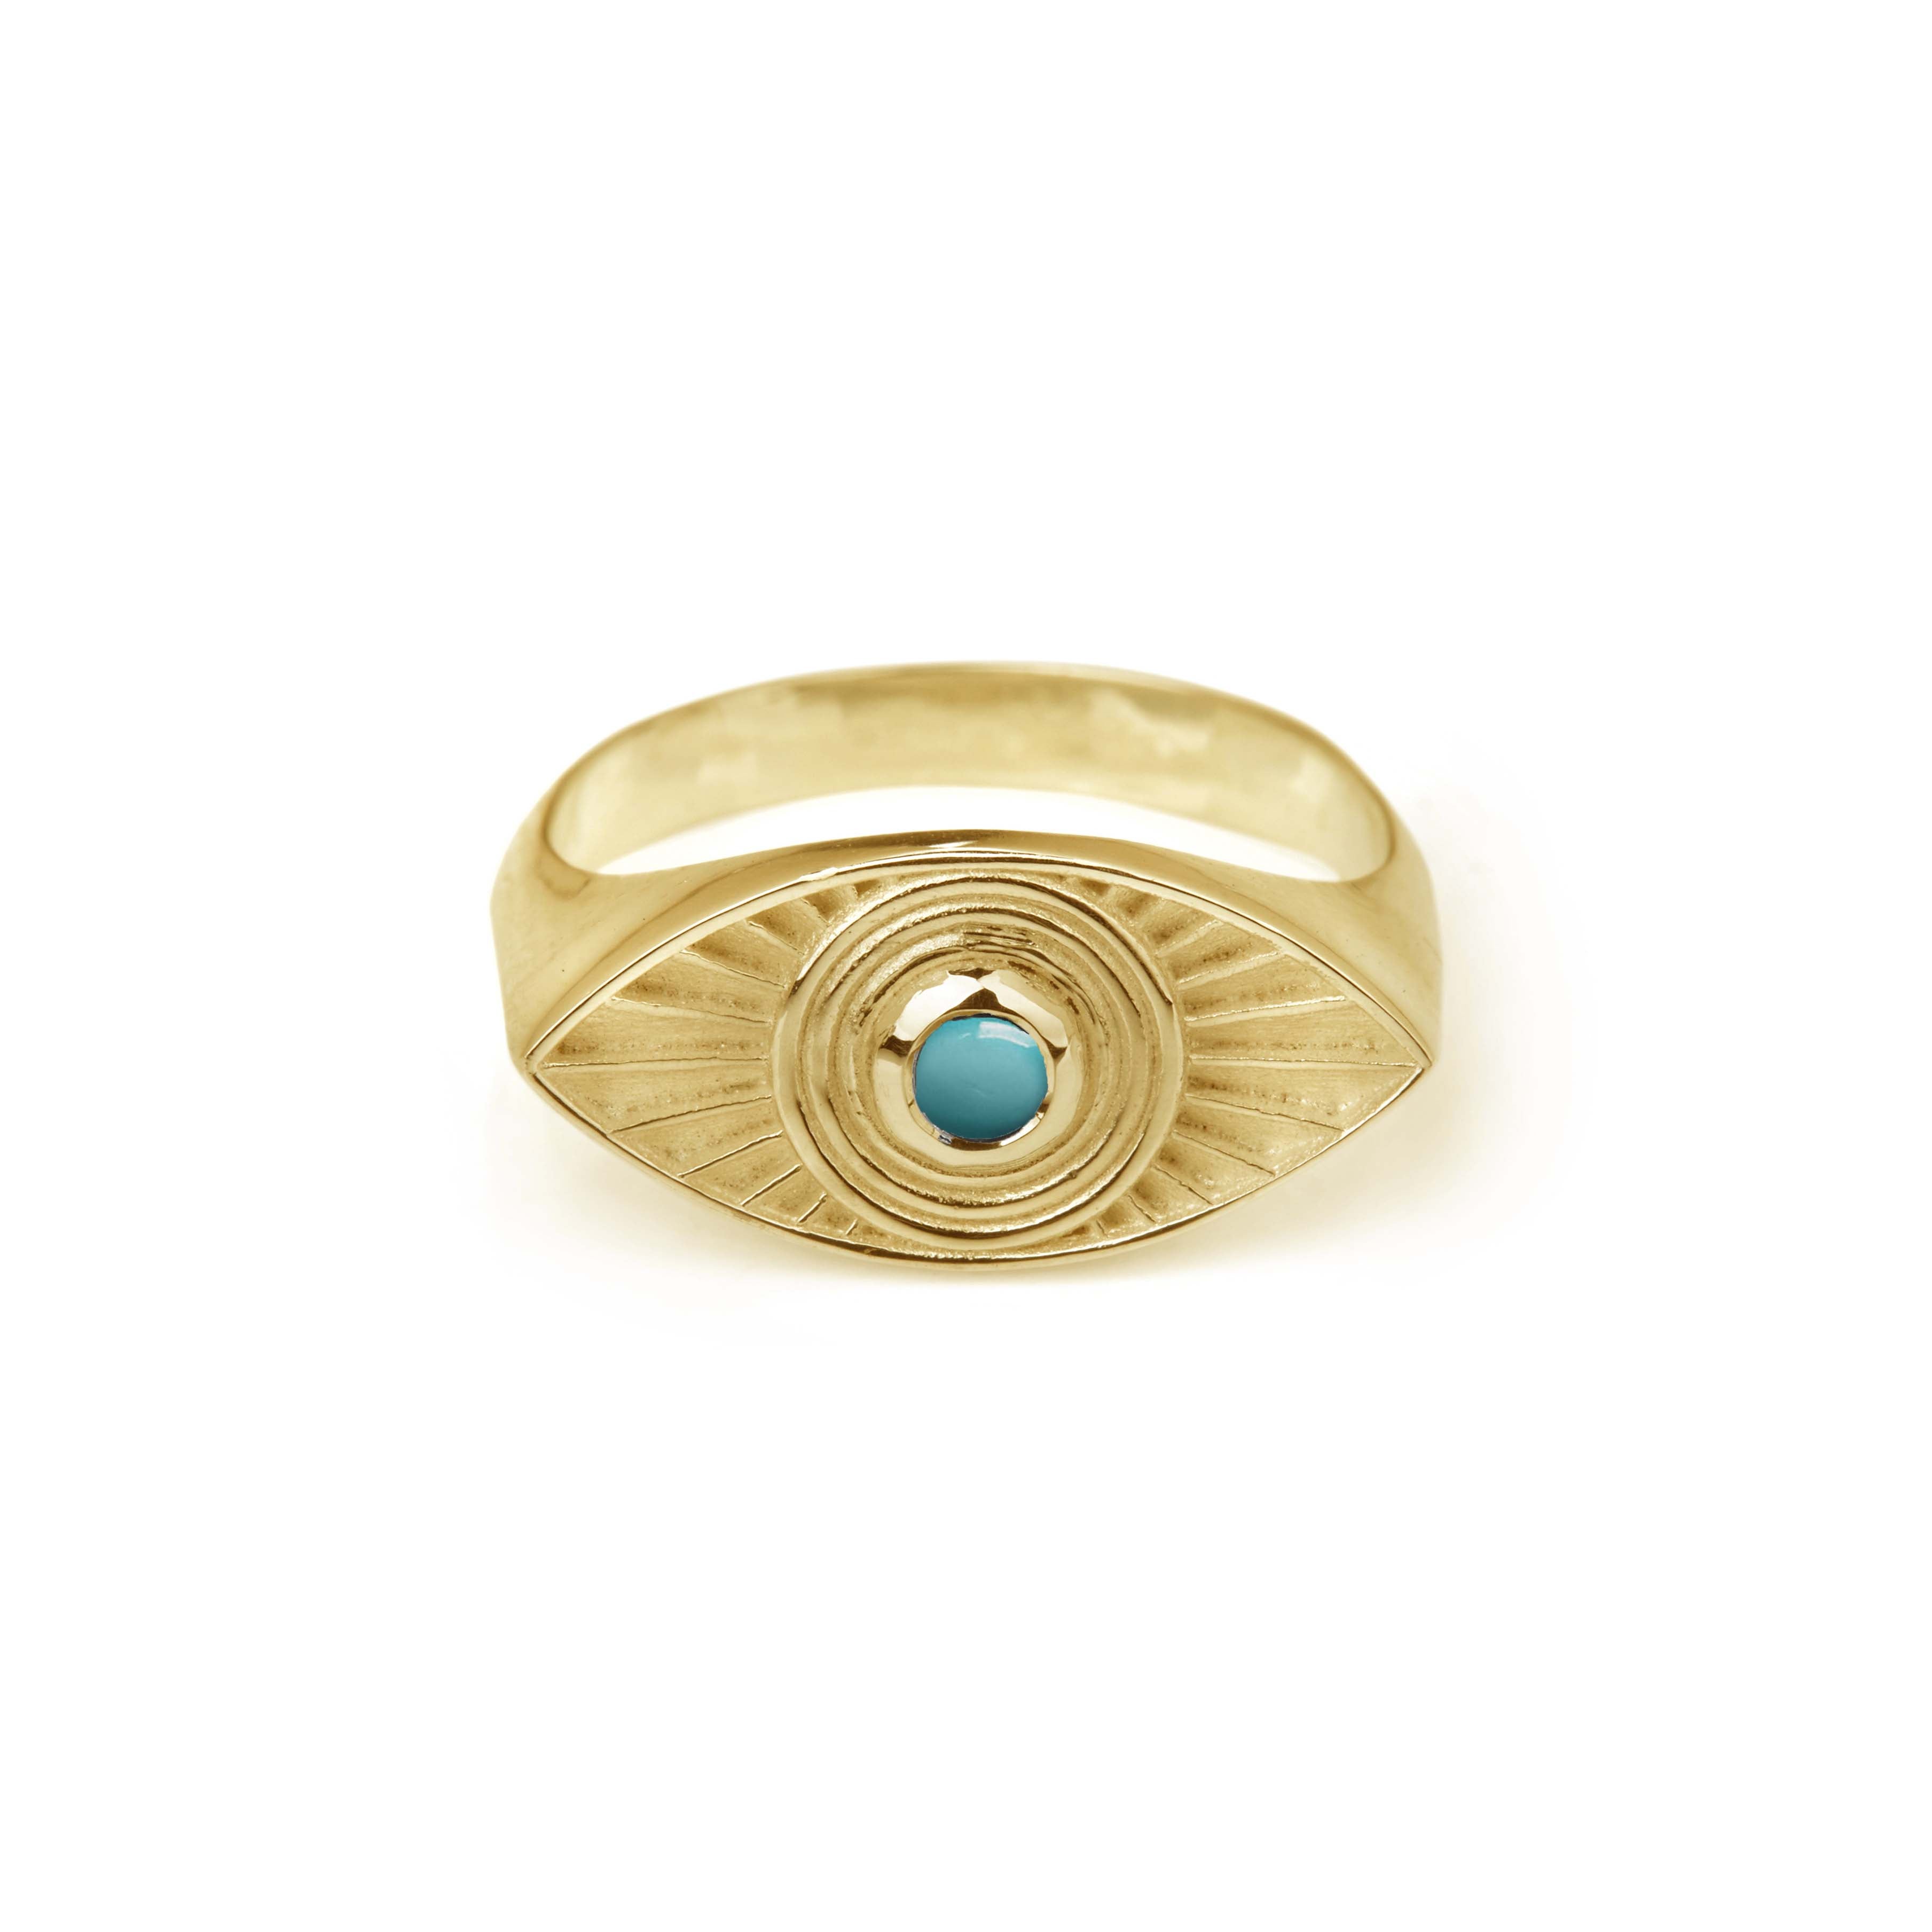 Rachel Entwistle Rays Of Light Ring Gold - Turquoise - L / Gold Vermeil